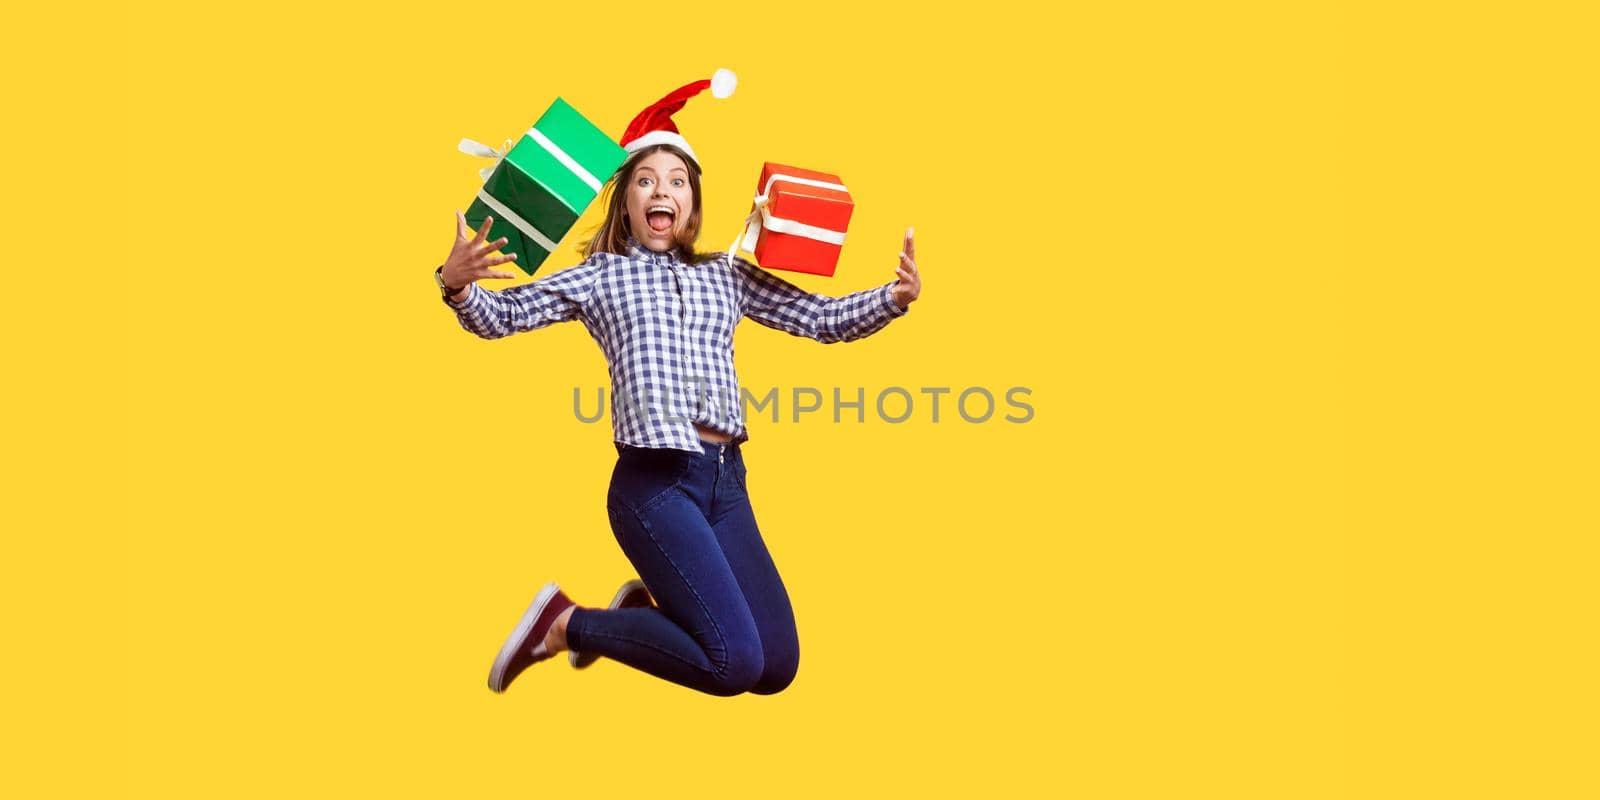 Portrait of extremely happy brunette woman in santa hat and checkered shirt jumping for joy, flying with wrapped xmas gift boxes, celebrating sales. indoor studio shot isolated on yellow background